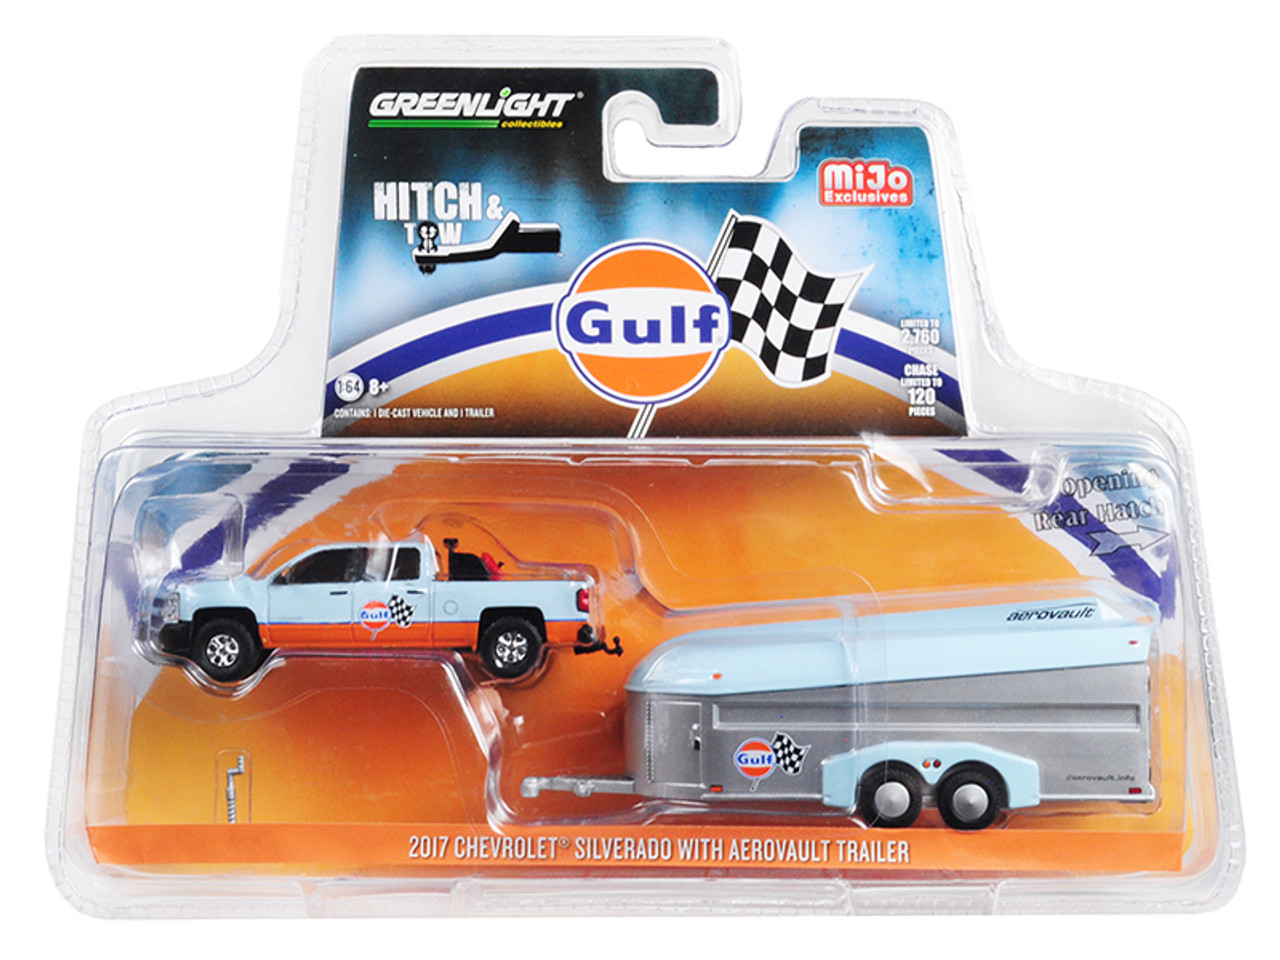 2017 Chevrolet Silverado Pickup Truck and Aerovault Trailer "Gulf Oil" "Hitch & Tow" Series Limited Edition to 2760 pieces Worldwide 1/64 Diecast Model Car by Greenlight